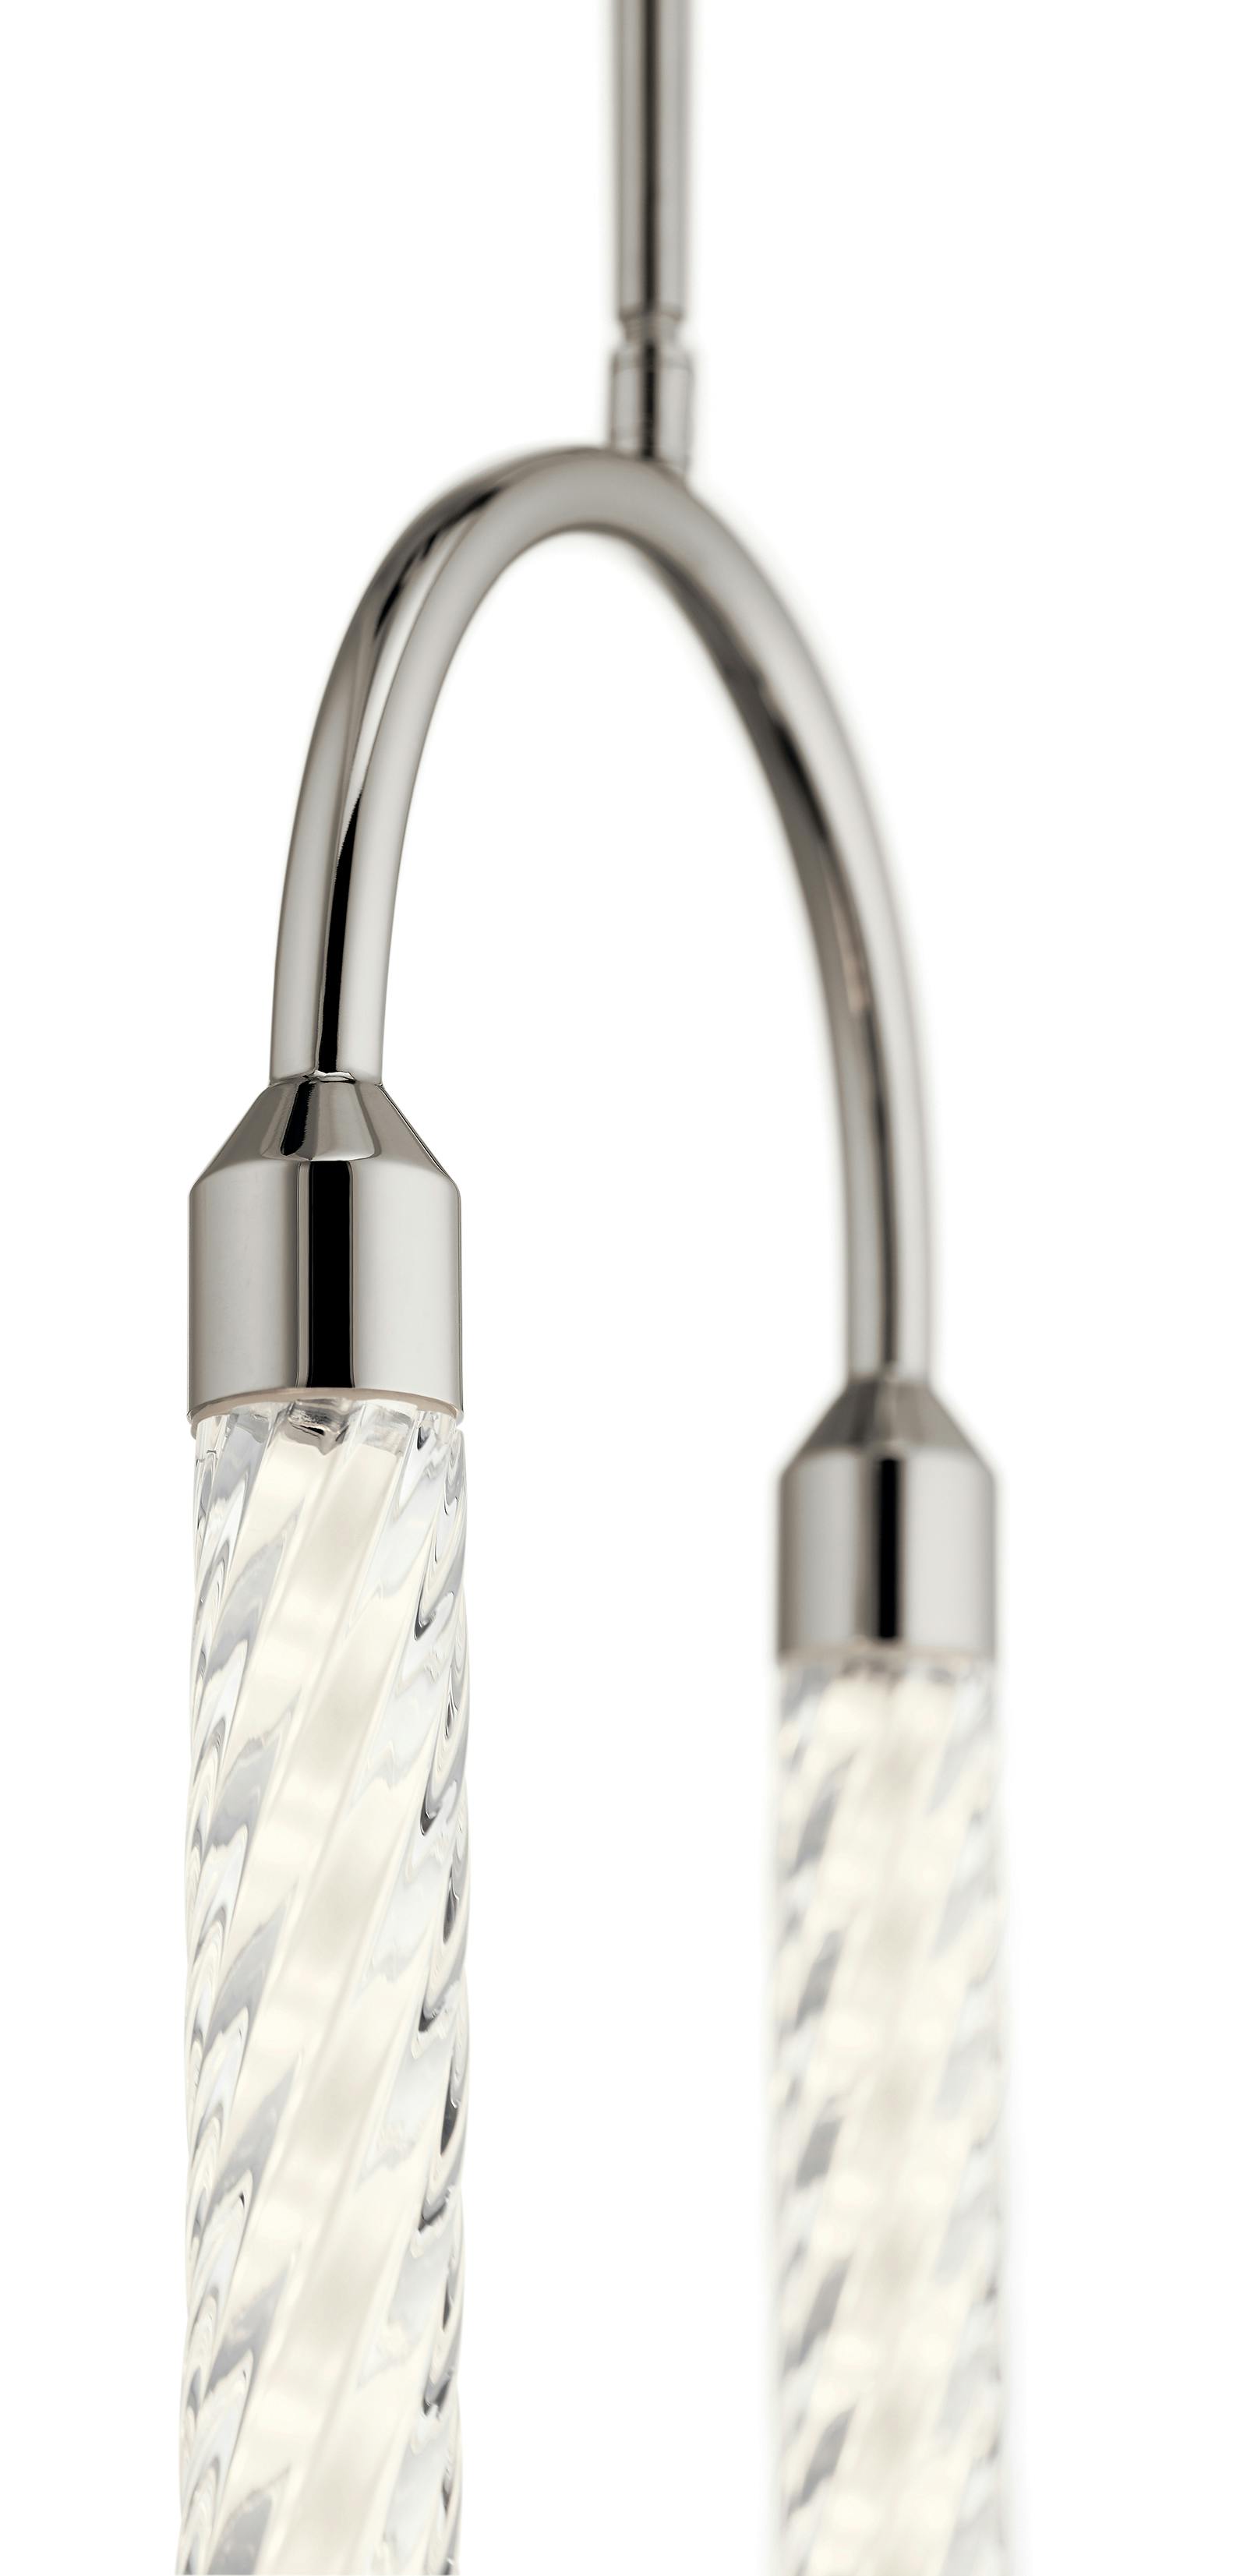 Close up view of the Delsey 1 Light LED Mini Pendant Nickel on a white background